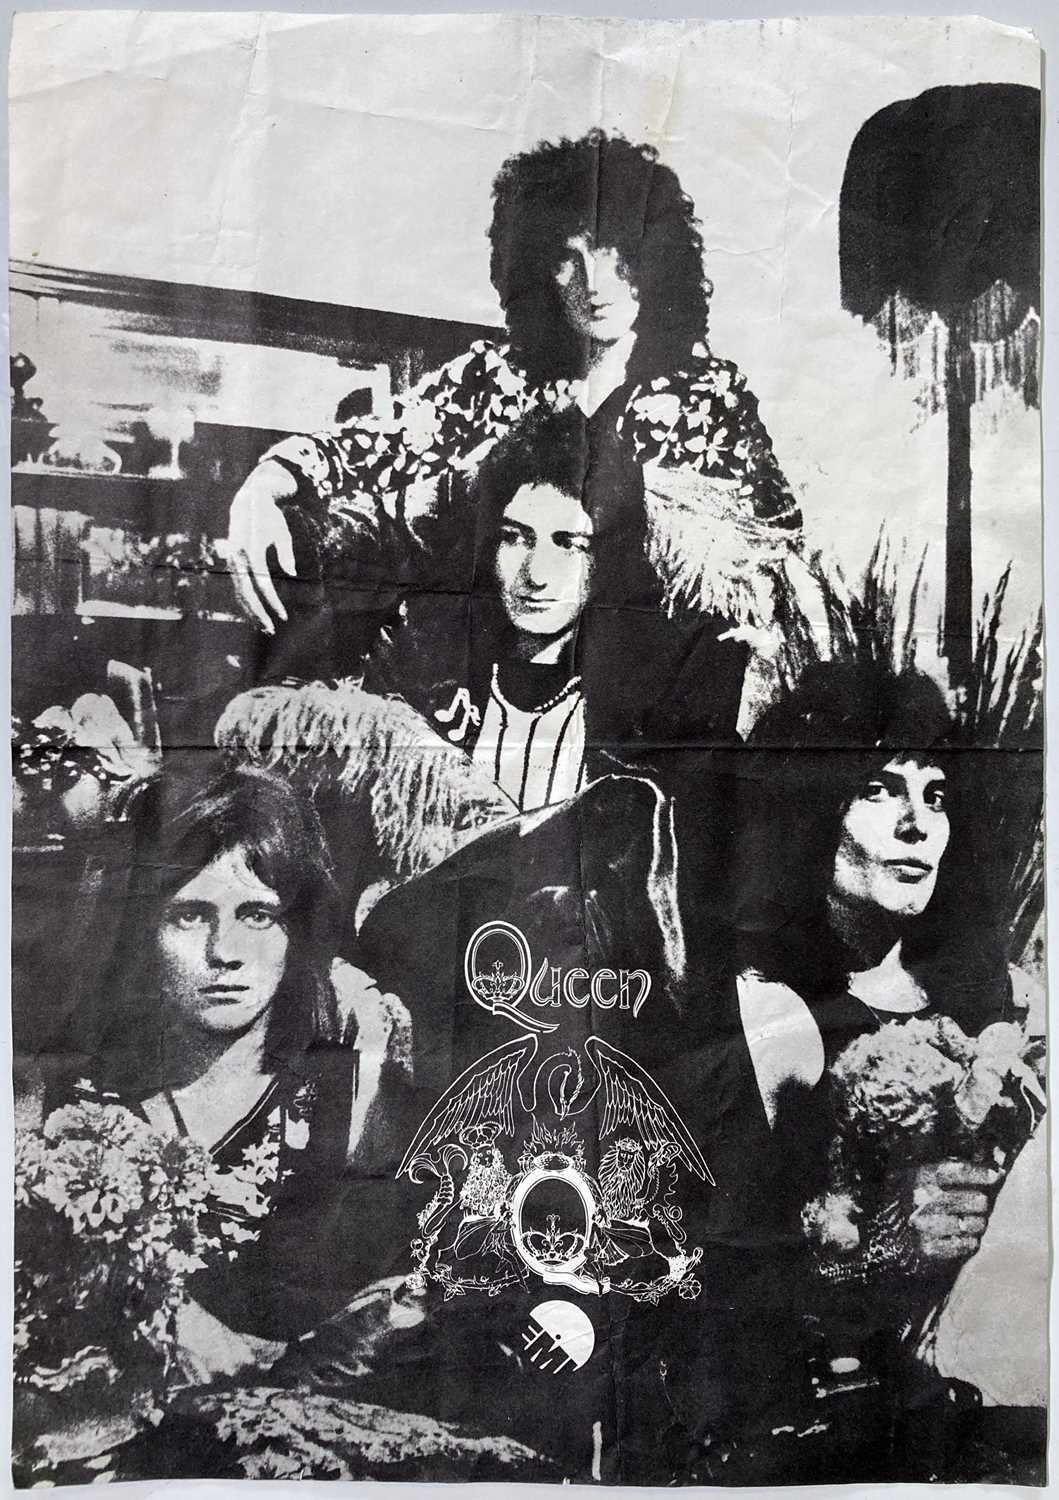 Lot 7 - QUEEN EMI MINI POSTER/HANDBILL FOR THEIR 1ST ALBUM SIGNED BY ROGER TAYLOR & MORE